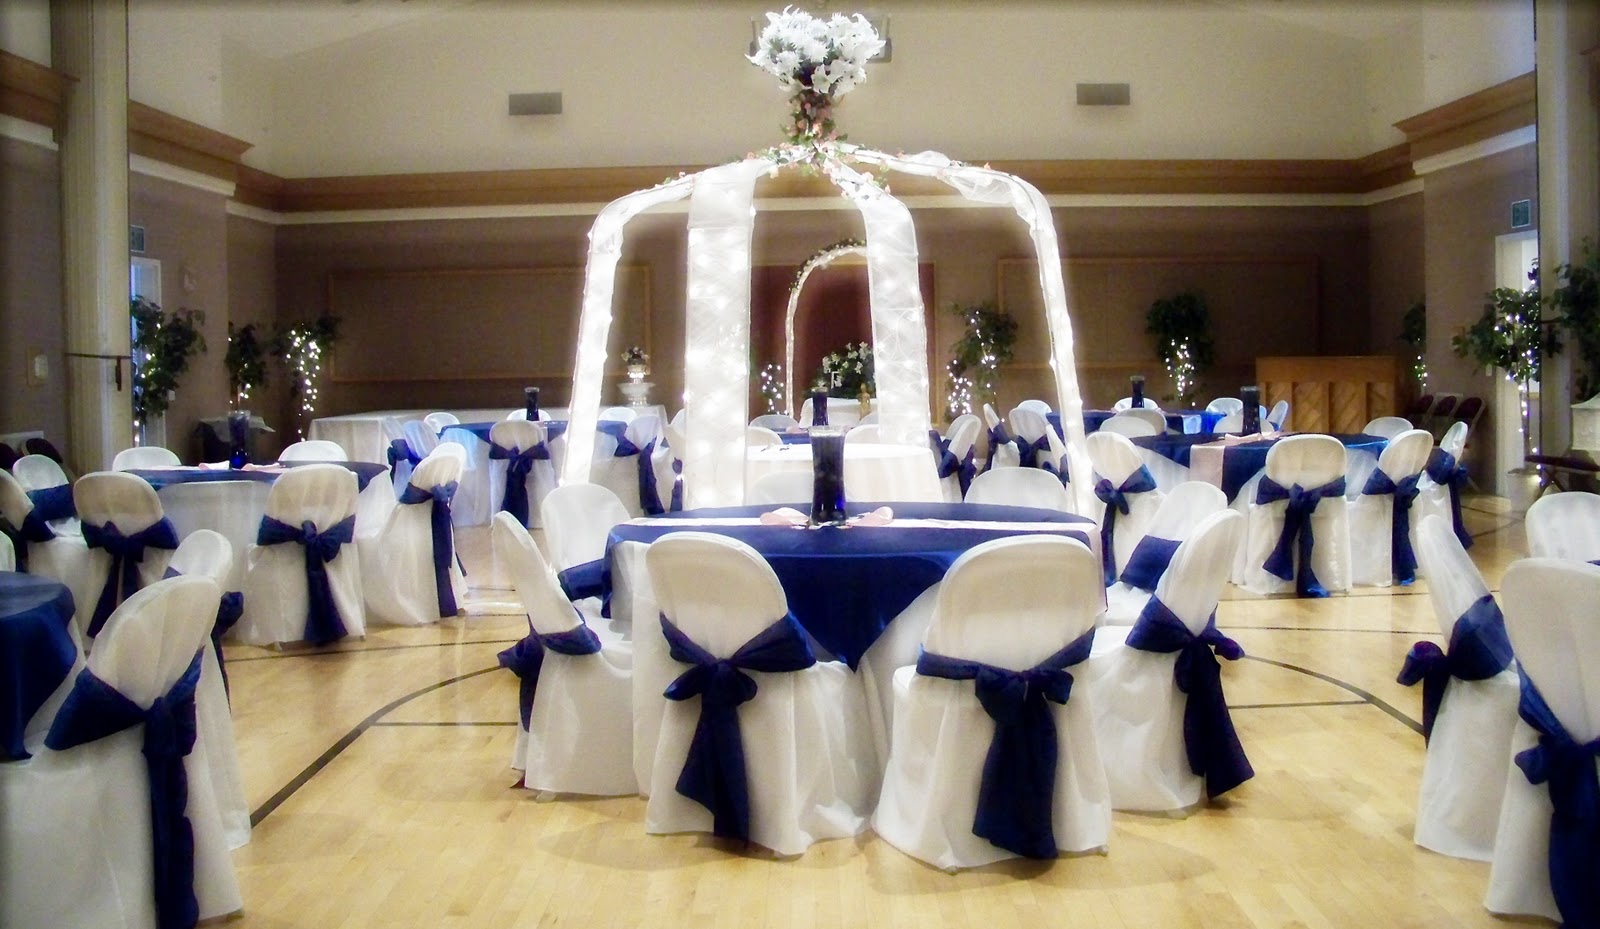 beautiful white wedding cakes Here are a few wedding decoration pictures from various weddings I 